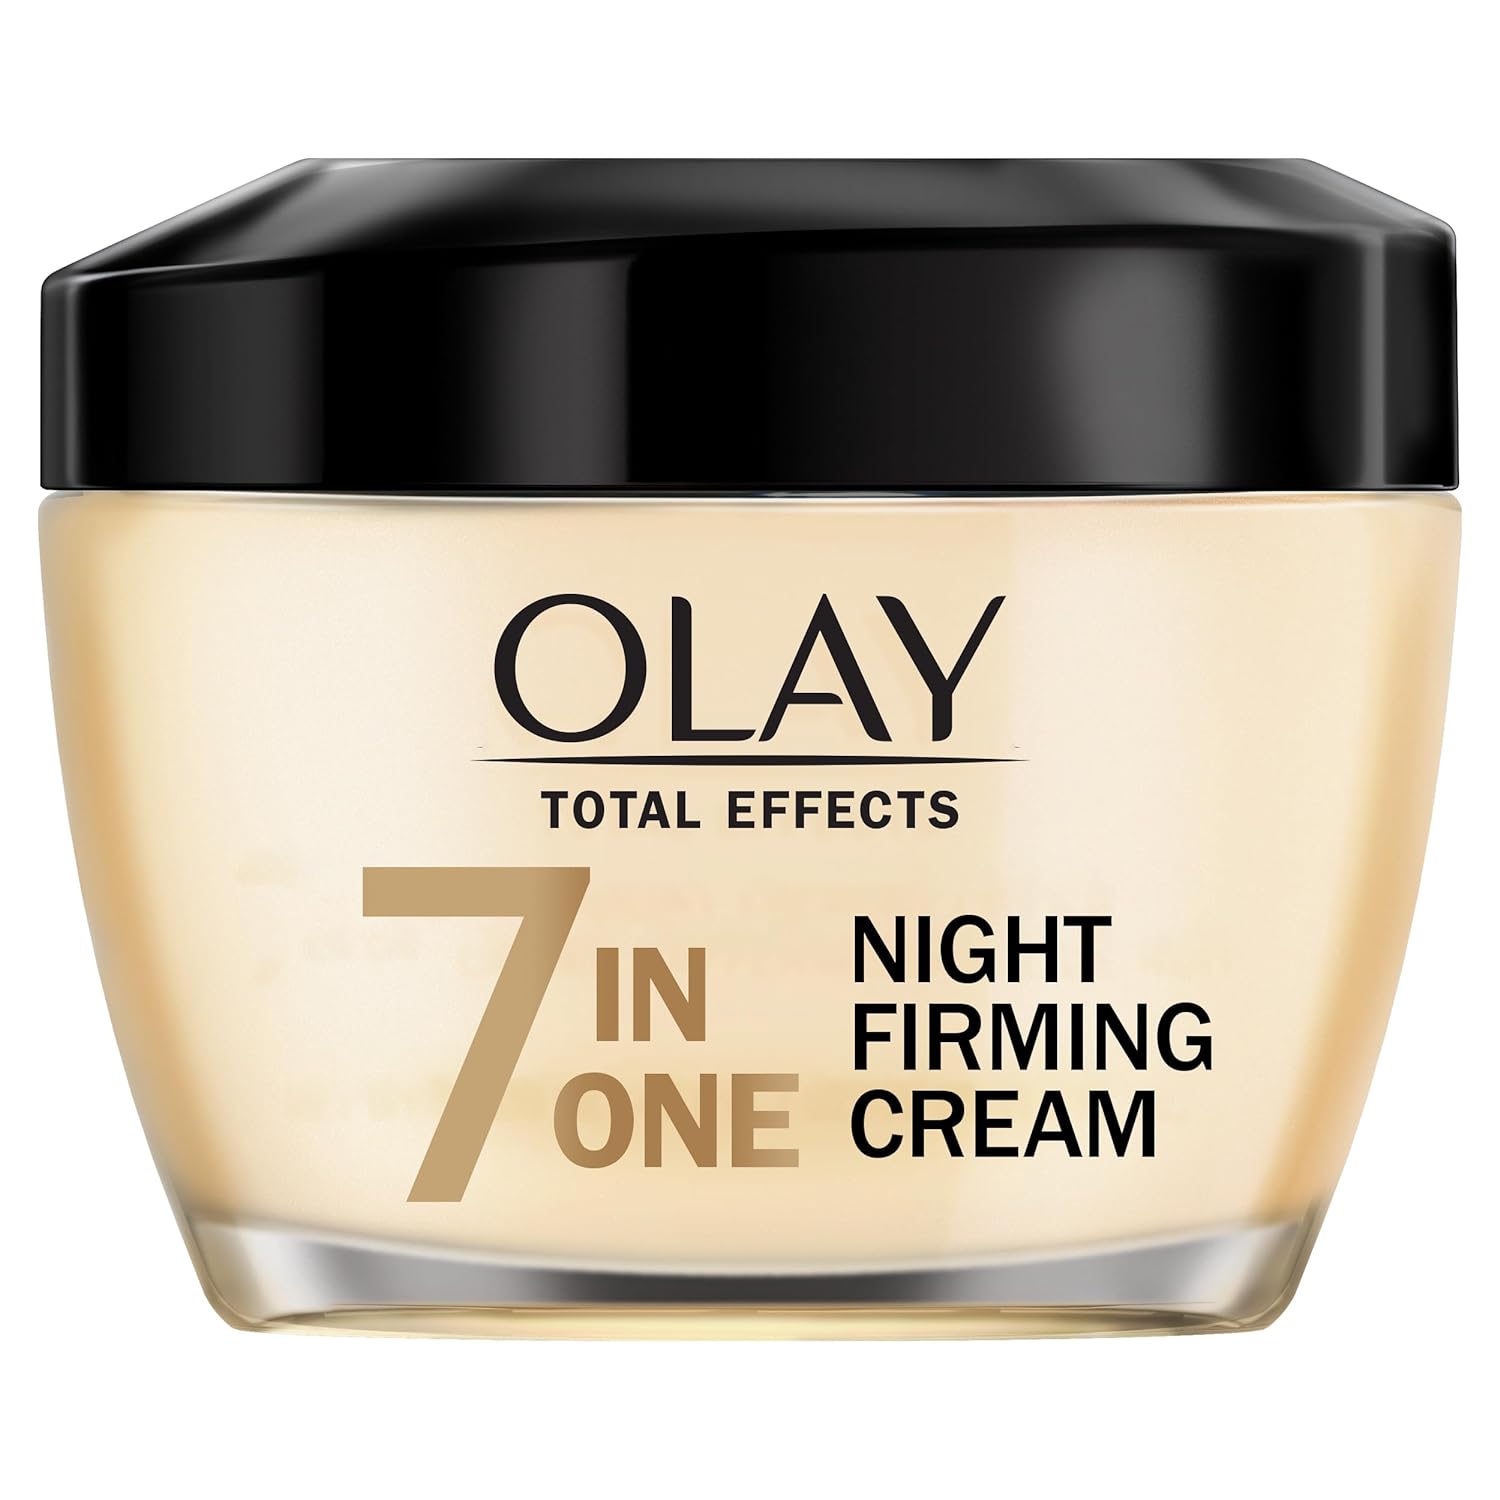 Olay Total Effects 7 in 1 Night, 1.7 oz